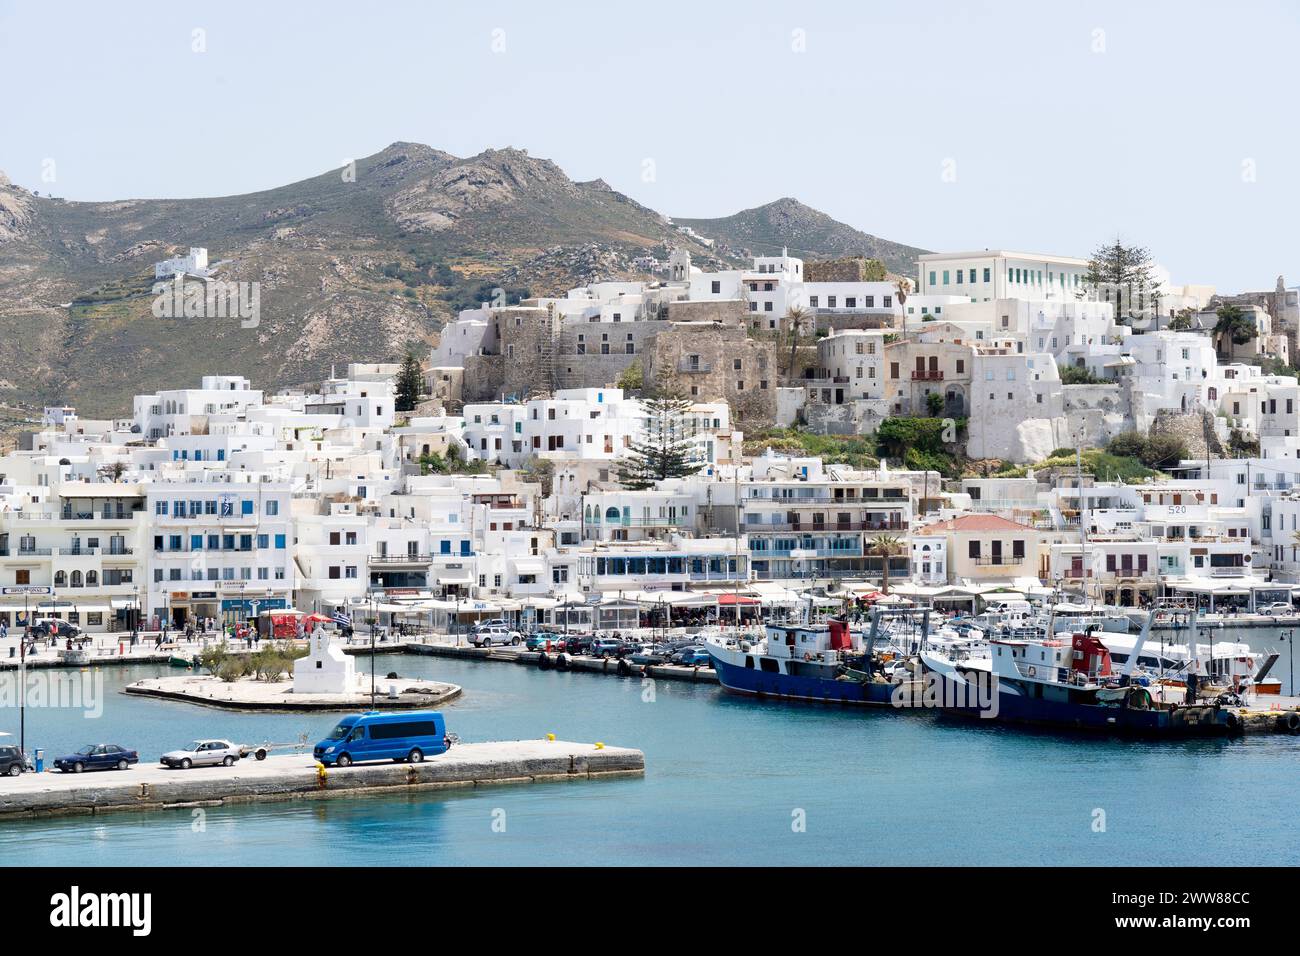 Port of Naxos island, in Cyclades, Greece, Europe. This is Chora, the capital town of Naxos, with the medieval castle atop the settlement. Stock Photo